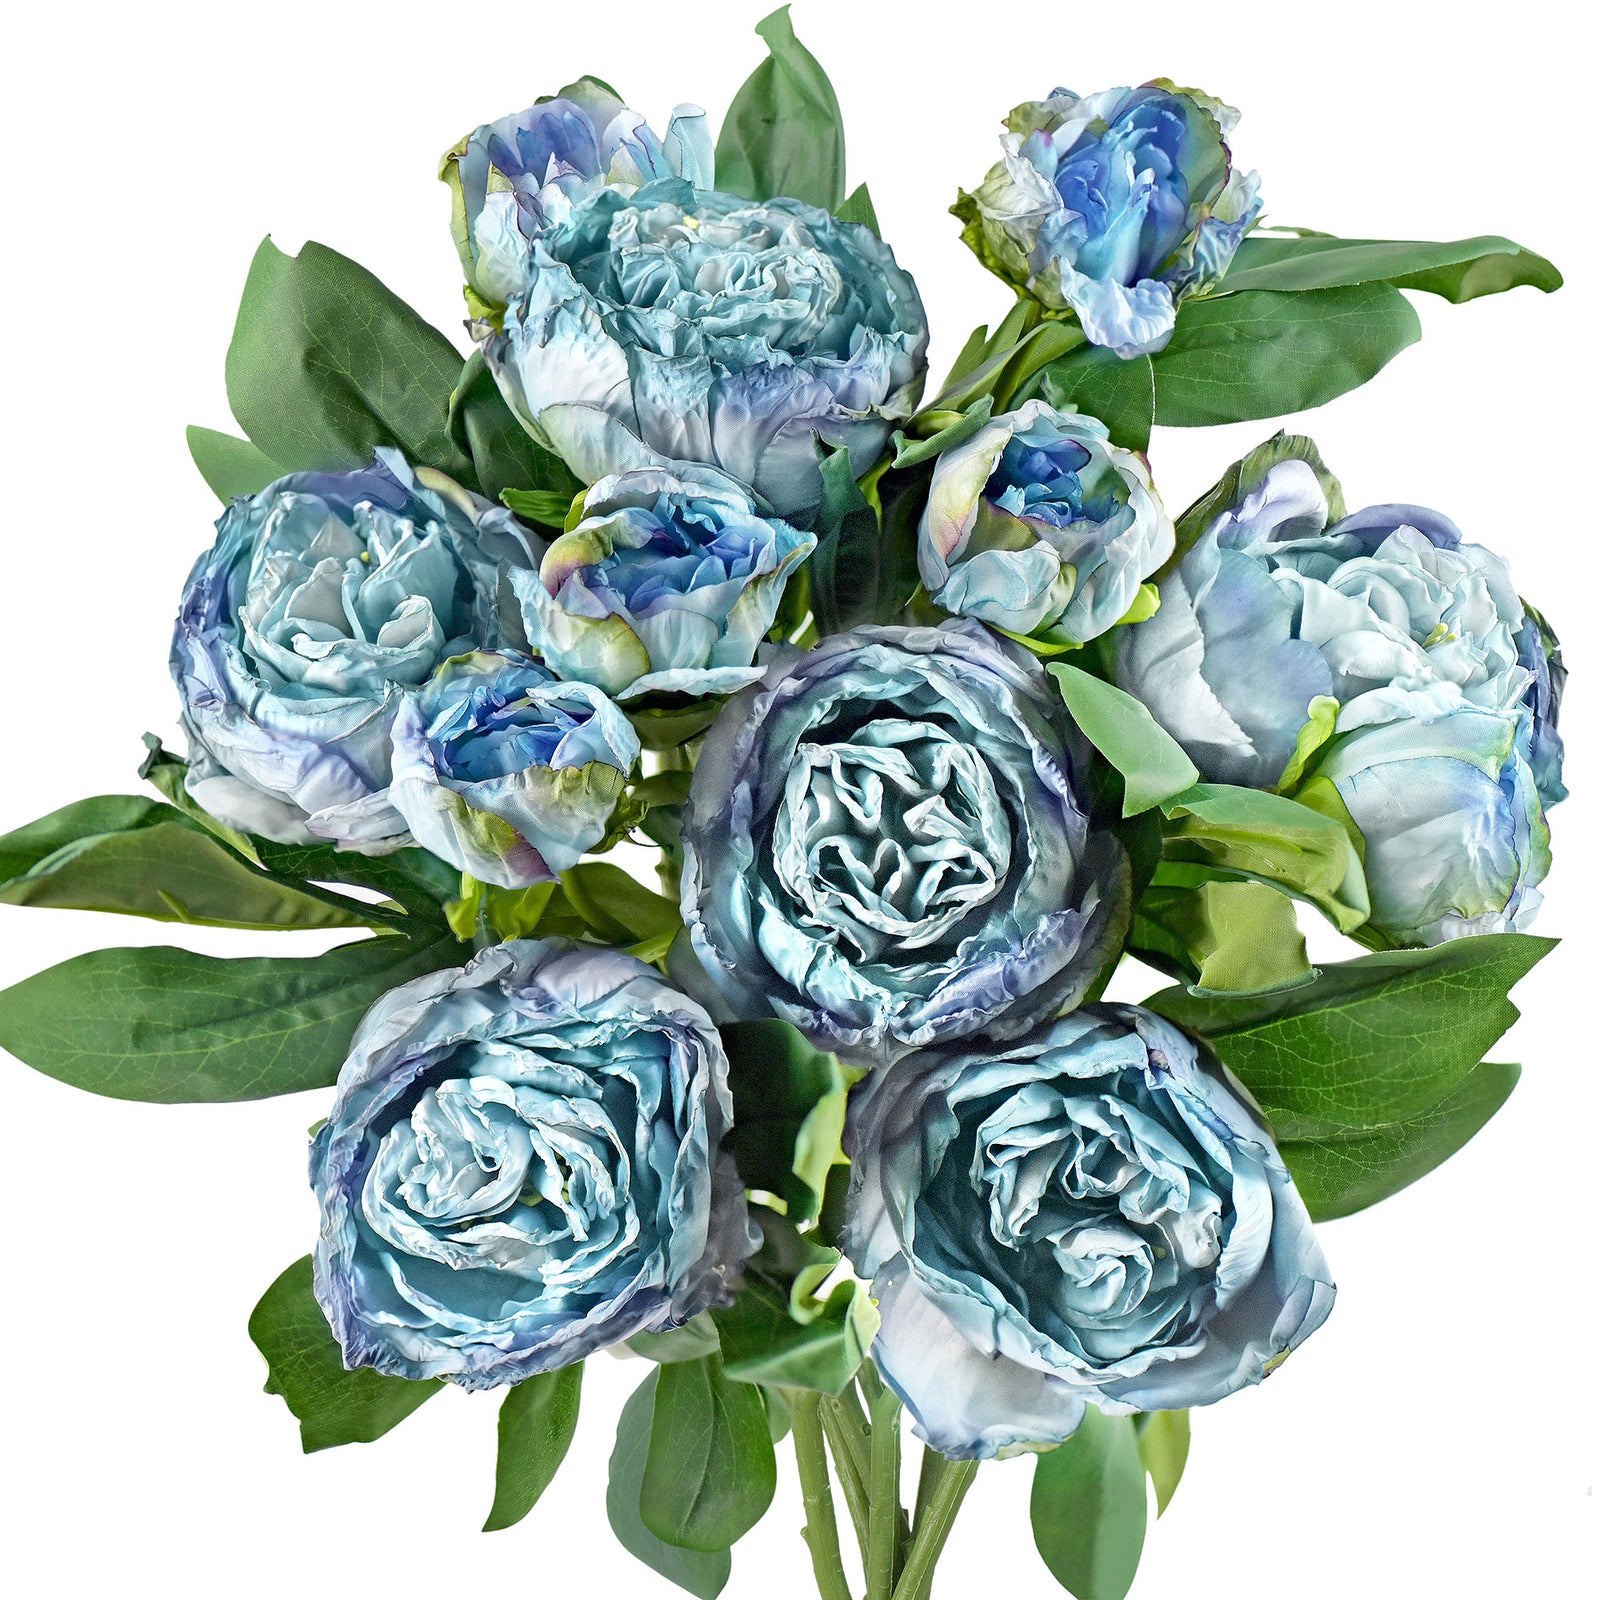 Artificial Flower Exquisite Fresh-keeping Realistic Aesthetic Visual Effect  Artificial Bridal Bouquet Marriage Supplies 